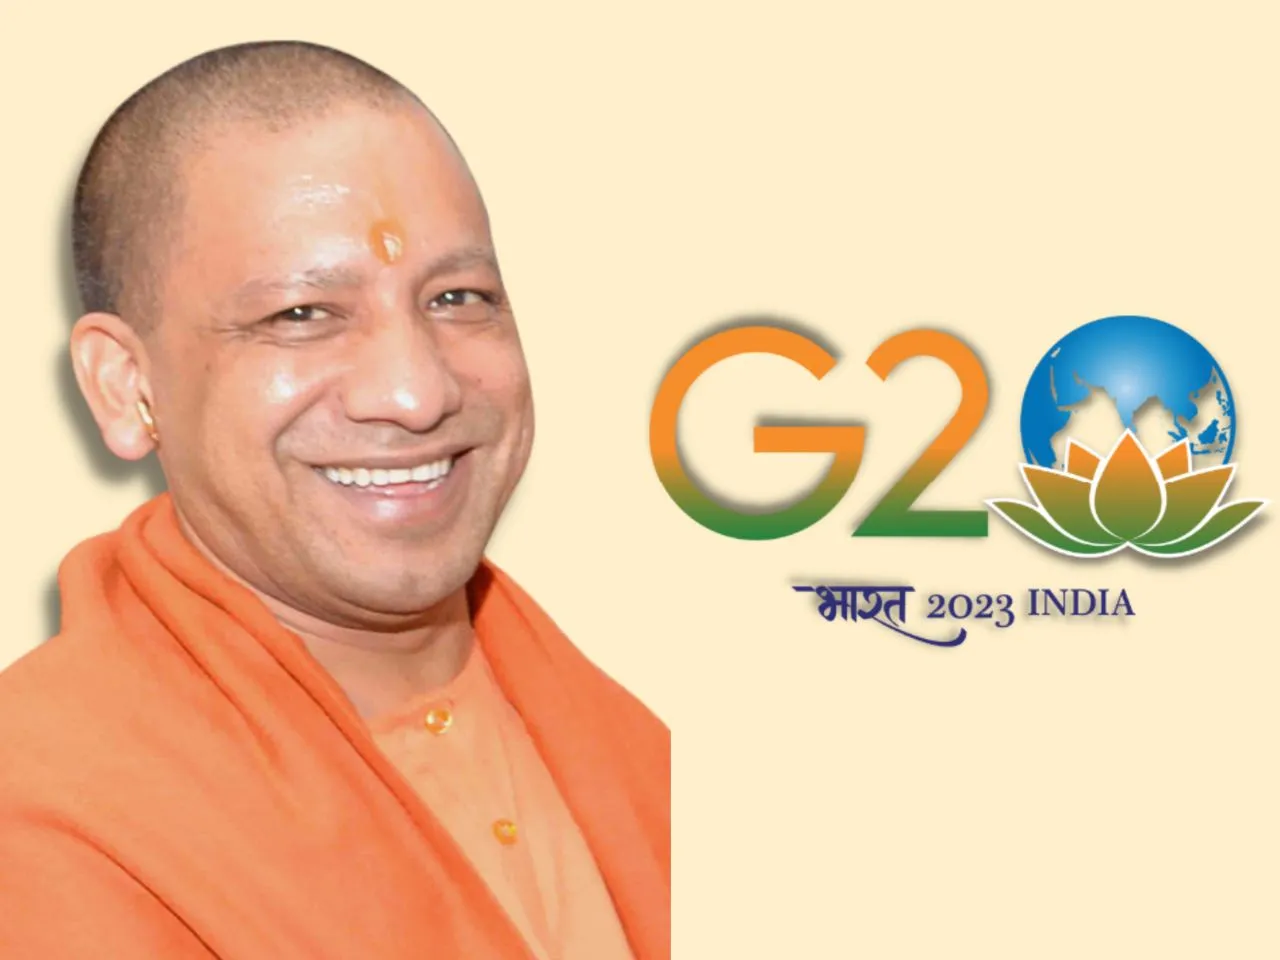 Yogi Govt starts preparations for beautification of cities in view of G-20 meet 